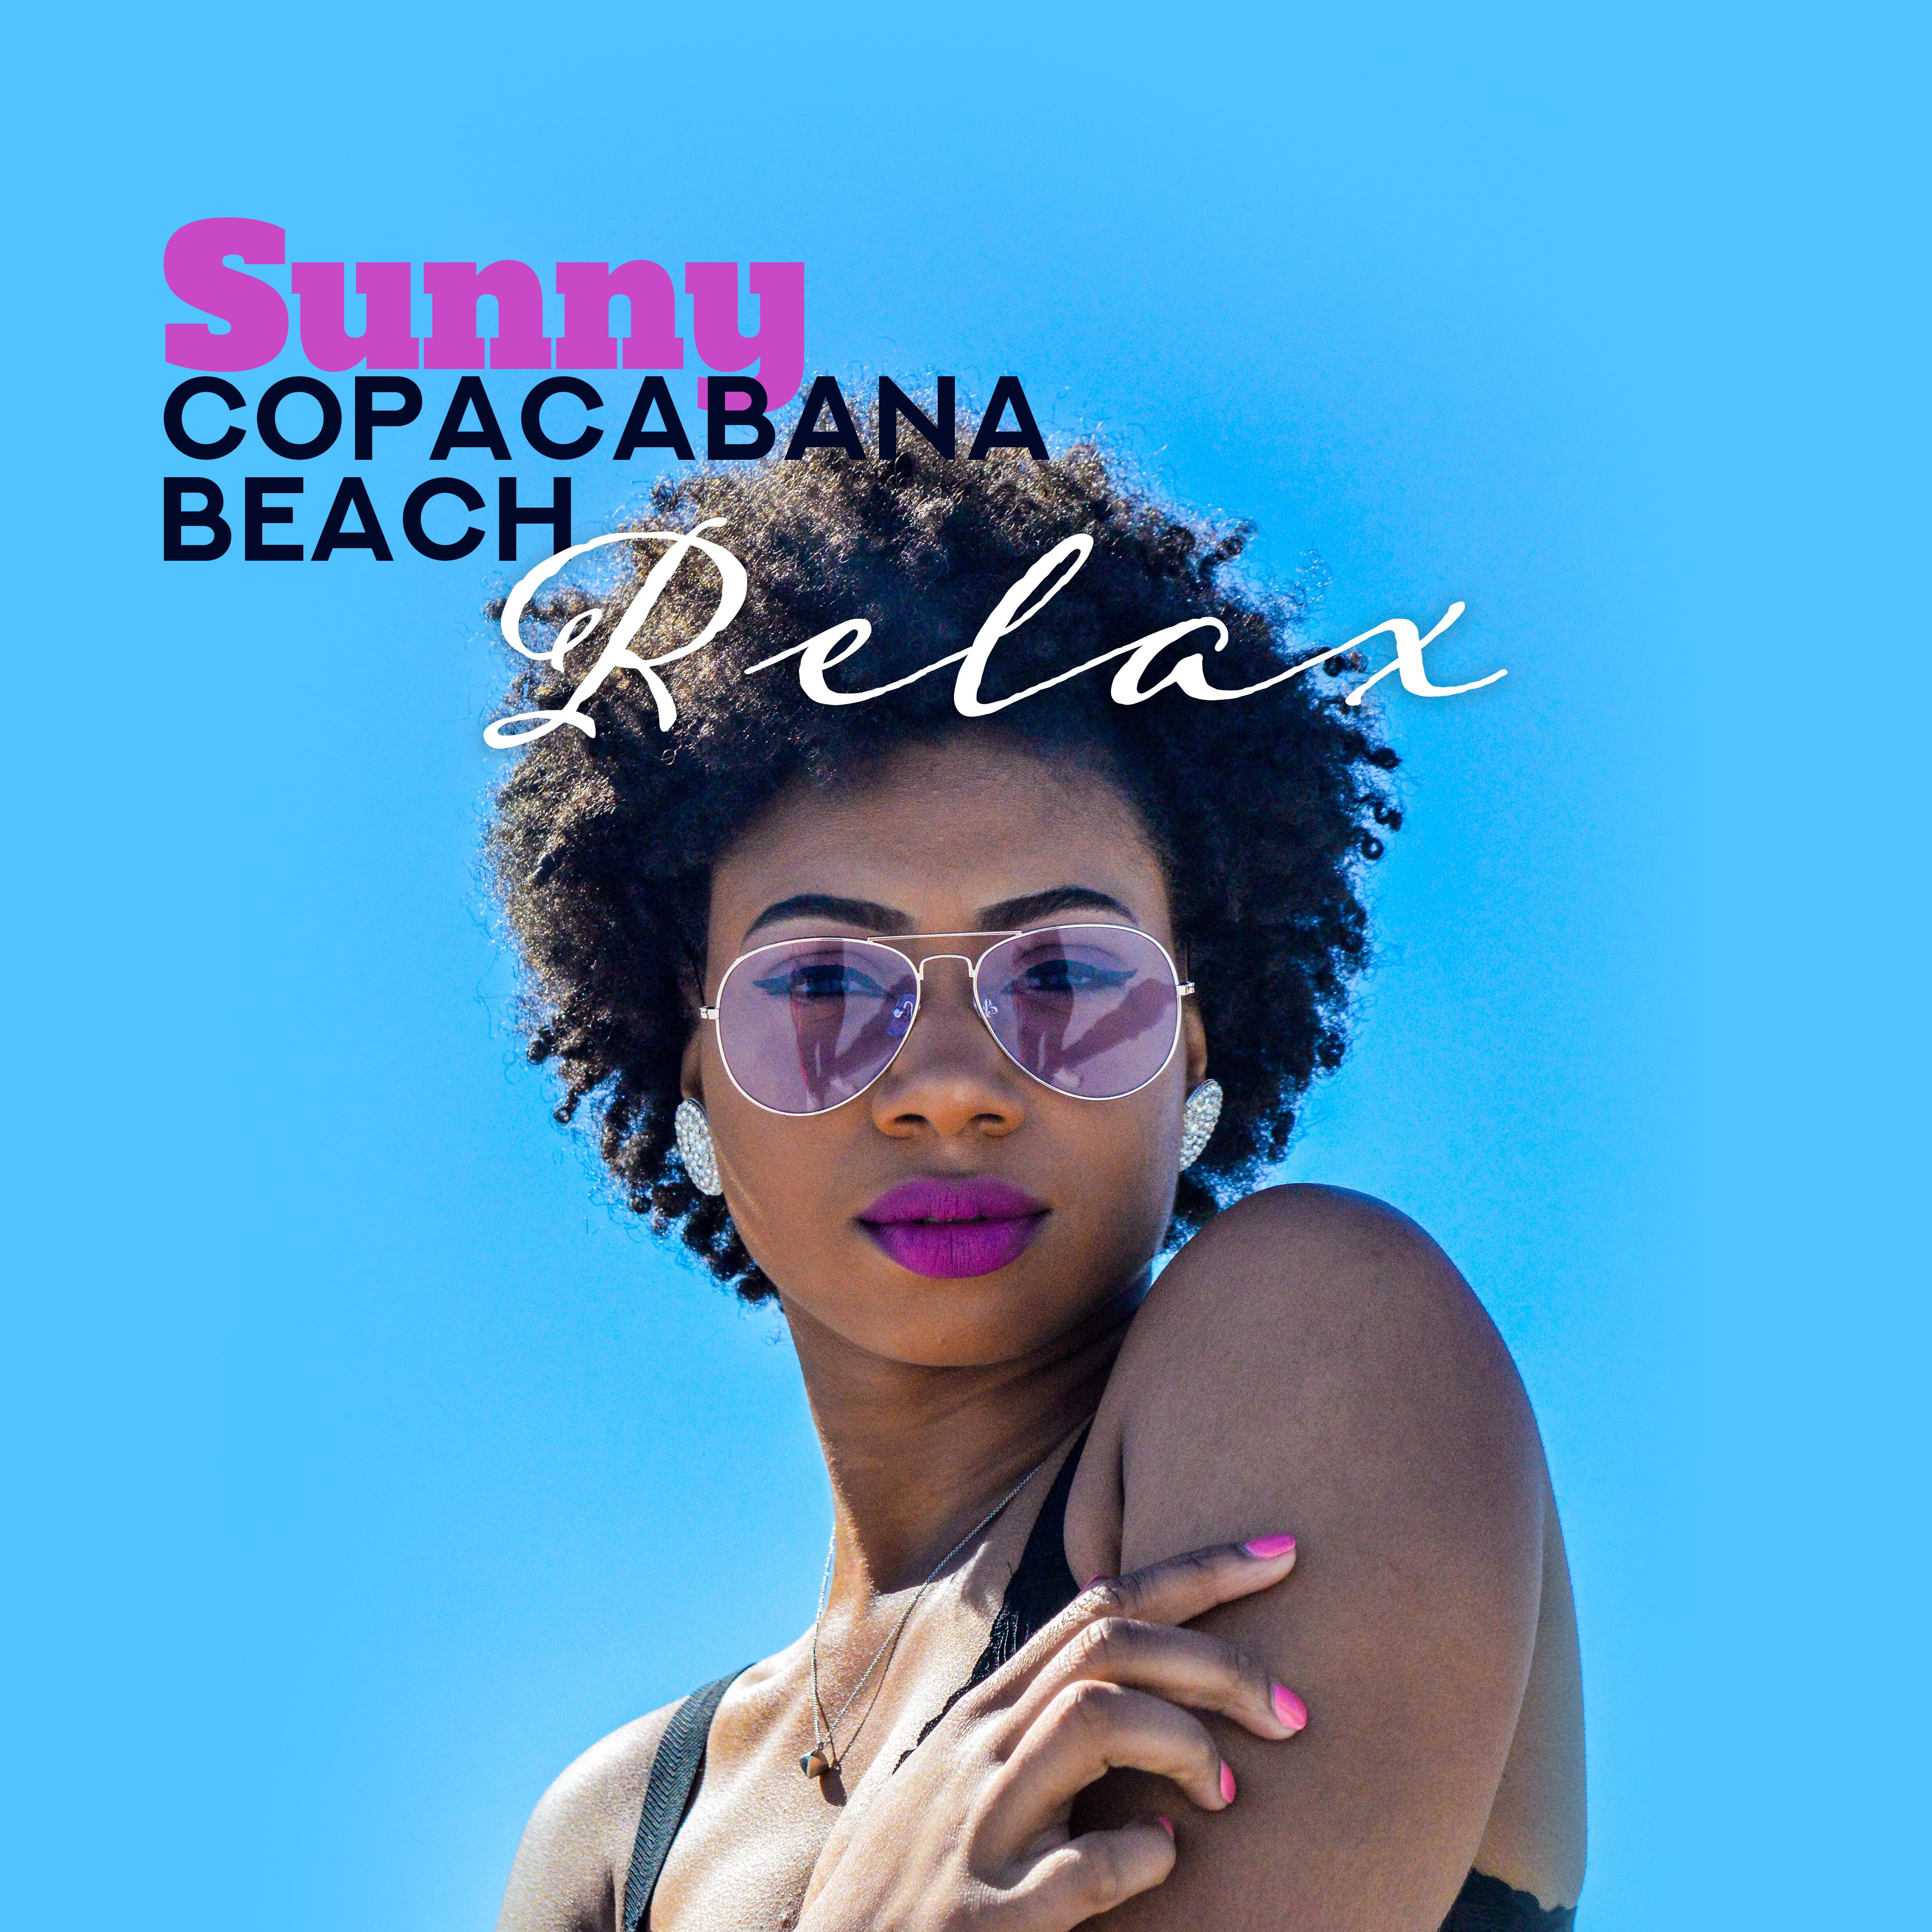 Sunny Copacabana Beach Relax: 2019 Chillout Smooth Music Selection, Holiday Rest Vibes, Summertime Beats